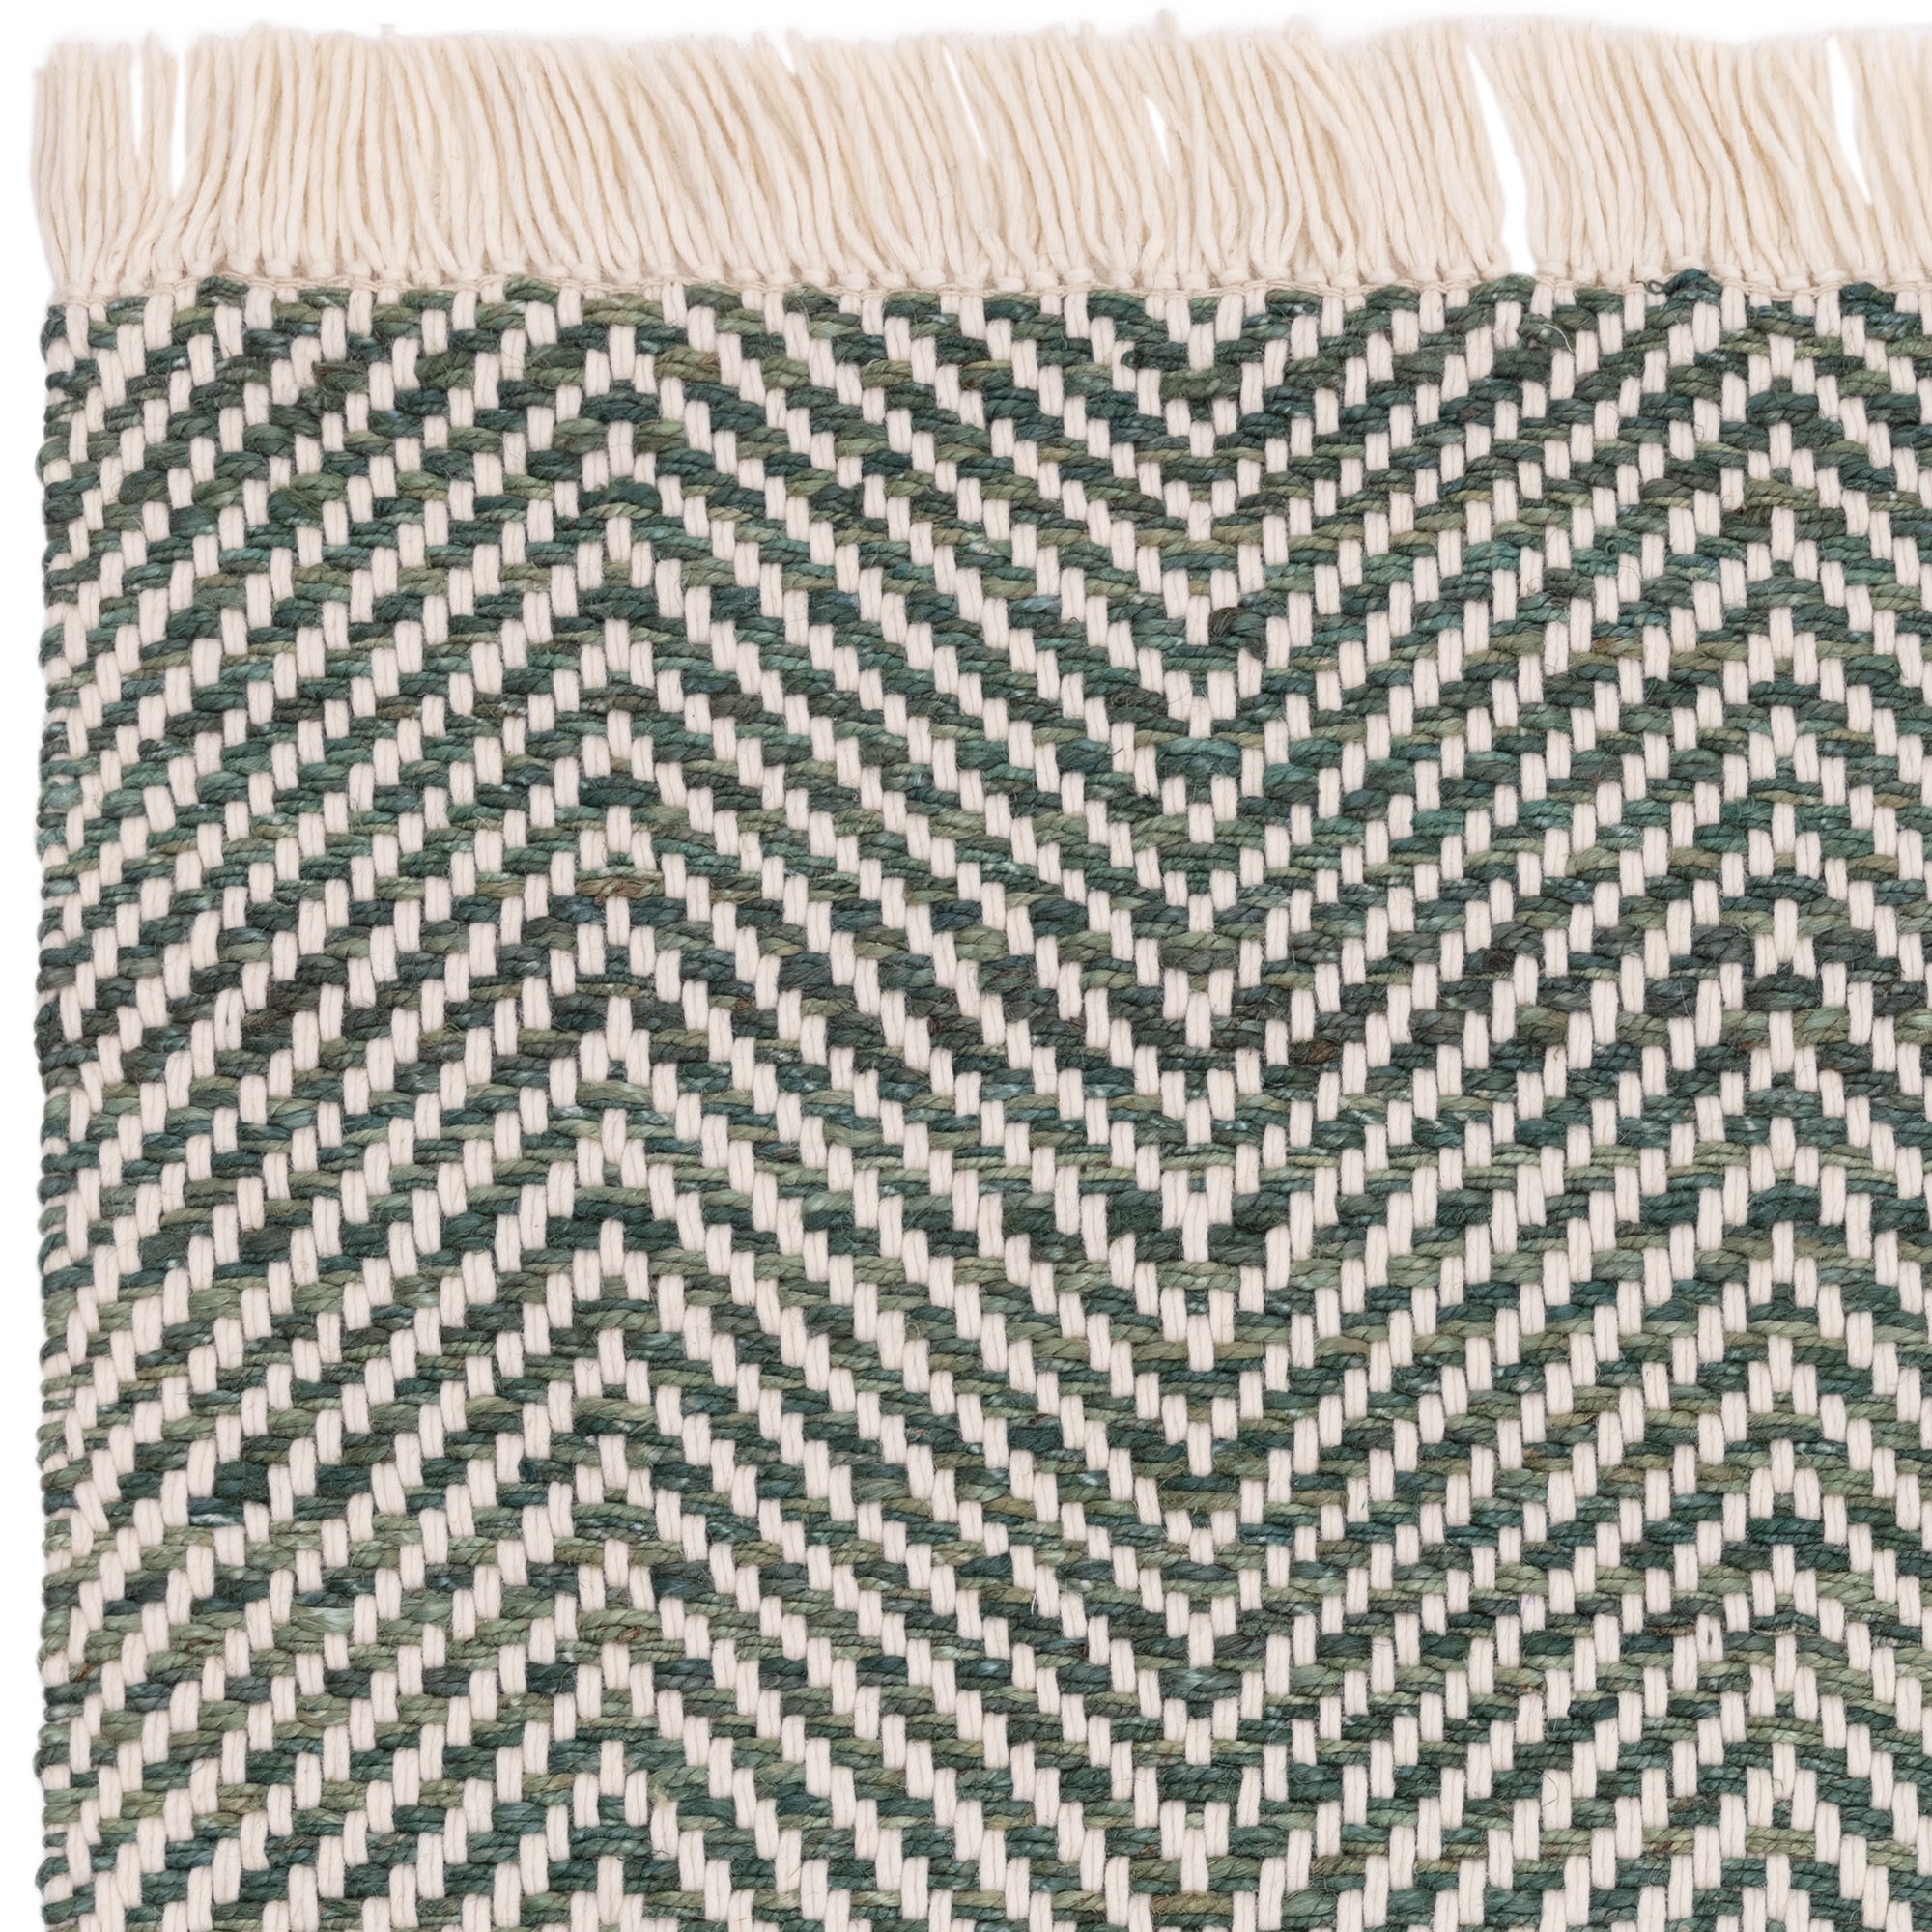 Textured woven rug with green and cream chevron pattern